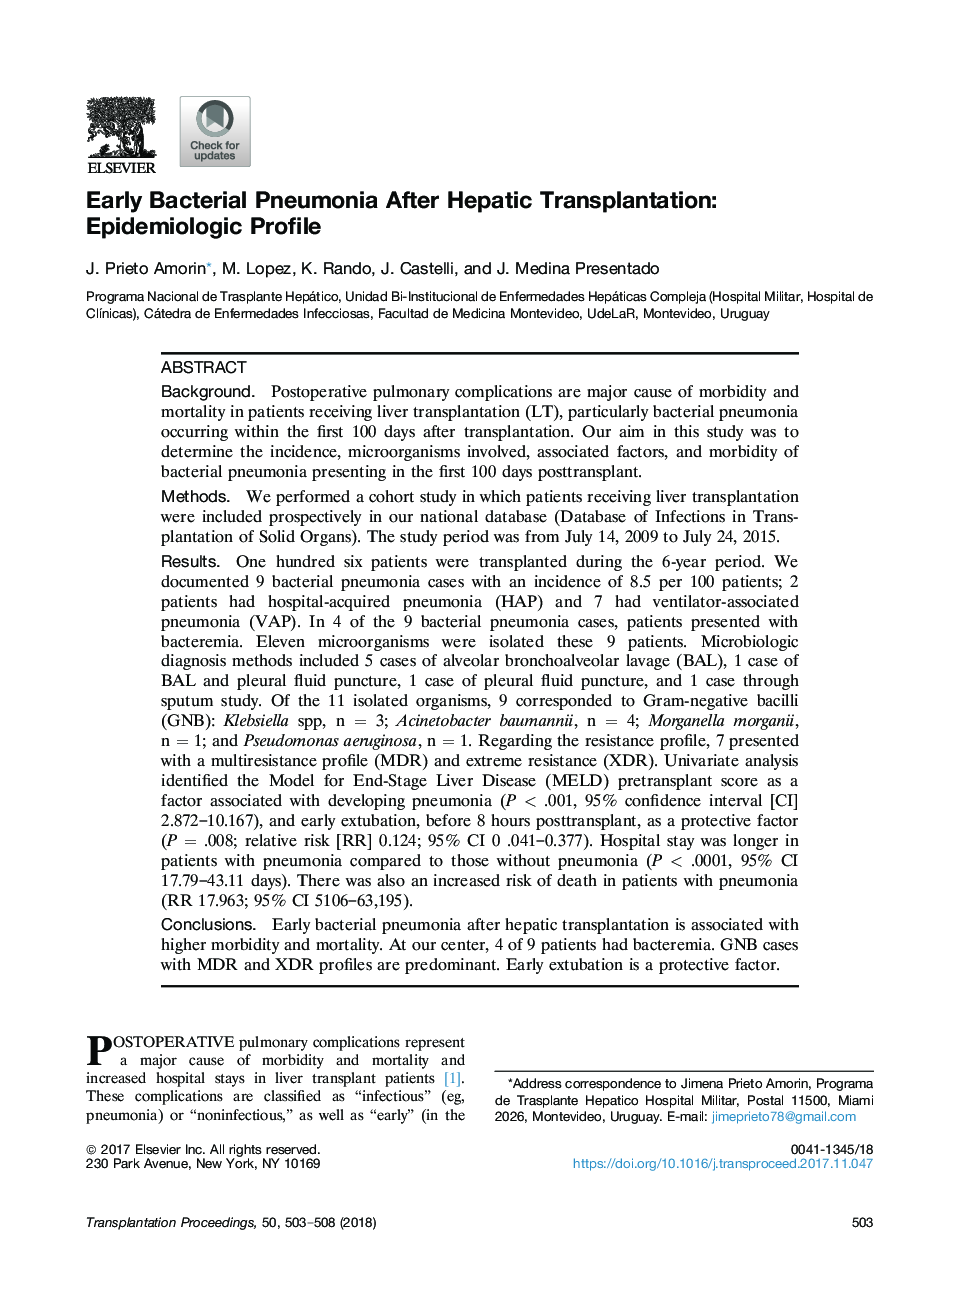 Early Bacterial Pneumonia After Hepatic Transplantation: Epidemiologic Profile